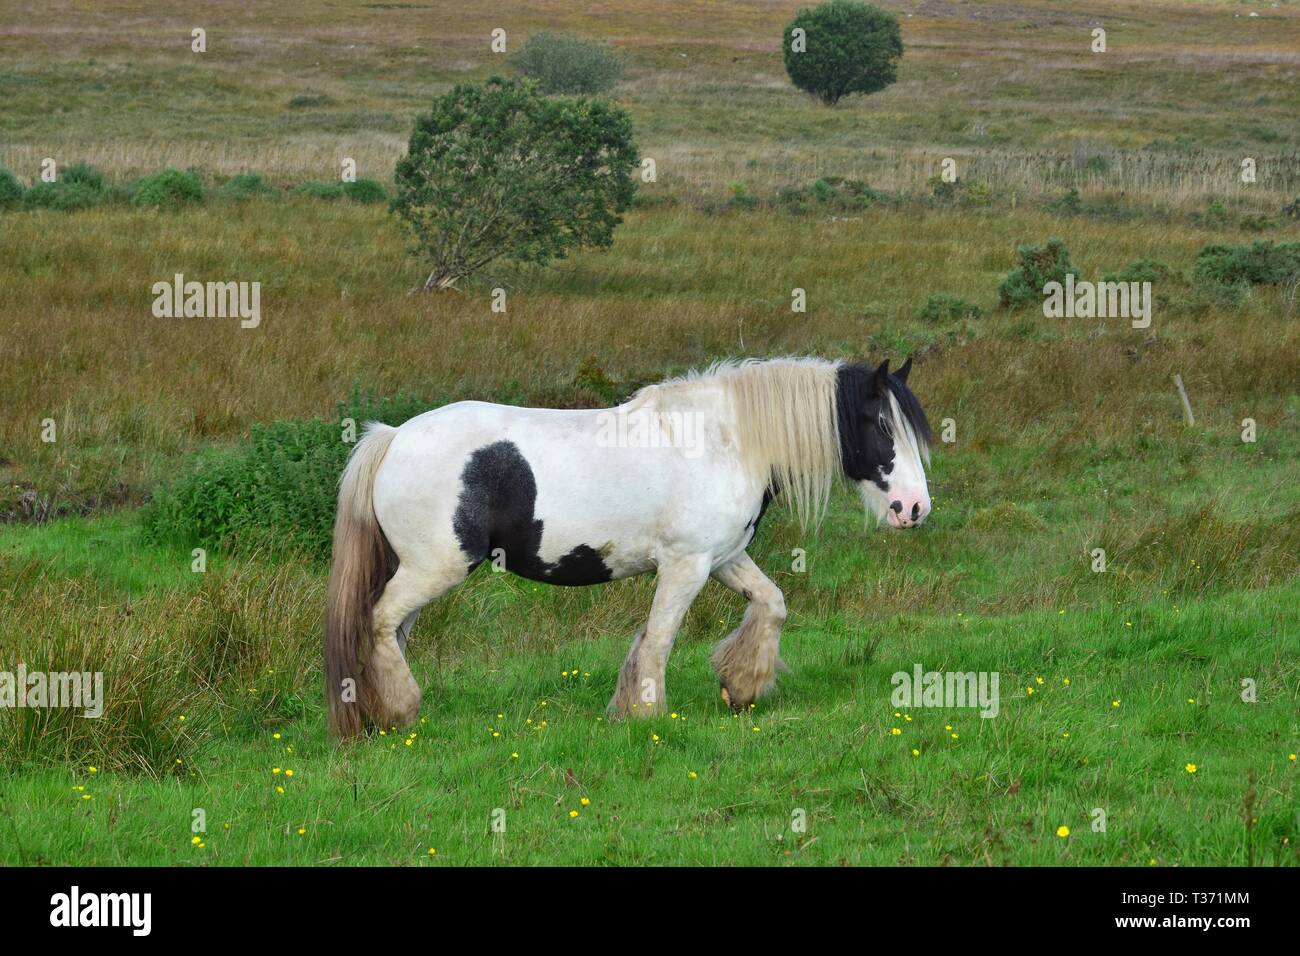 Beautiful piebald horse in Ireland. The horse has a long mane and feathering. It's walking. Landscape in the background. Stock Photo